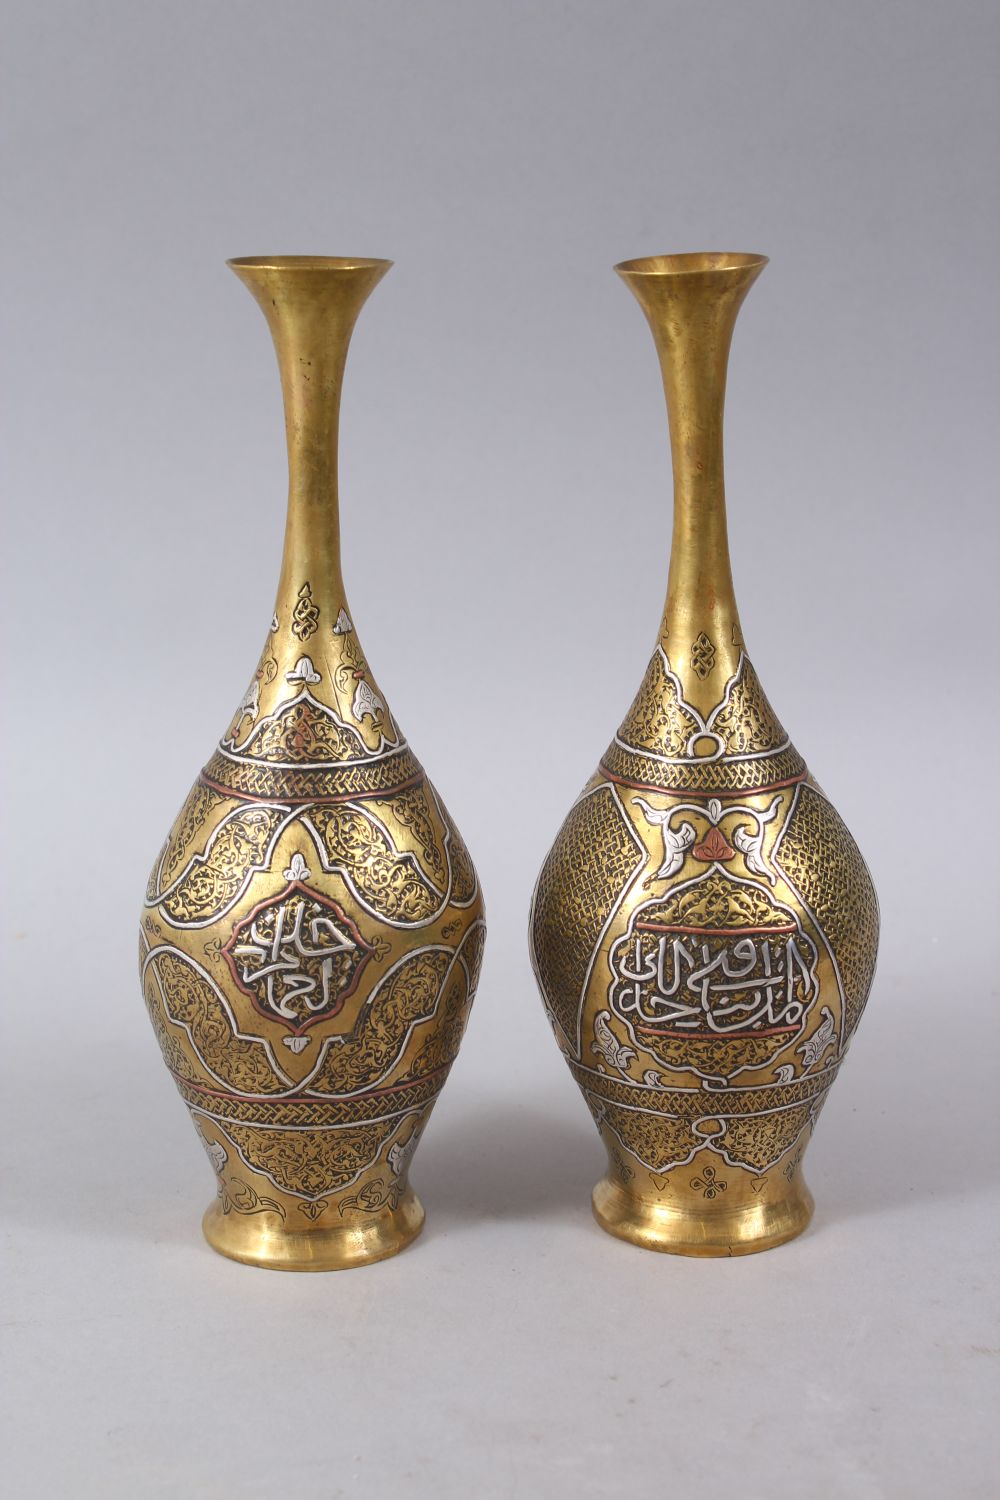 A COLLECTION OF FIVE 19TH CENTURY SILVER INLAID CAIROWARE PIECES, consisting of a pair of vases, a - Image 4 of 8